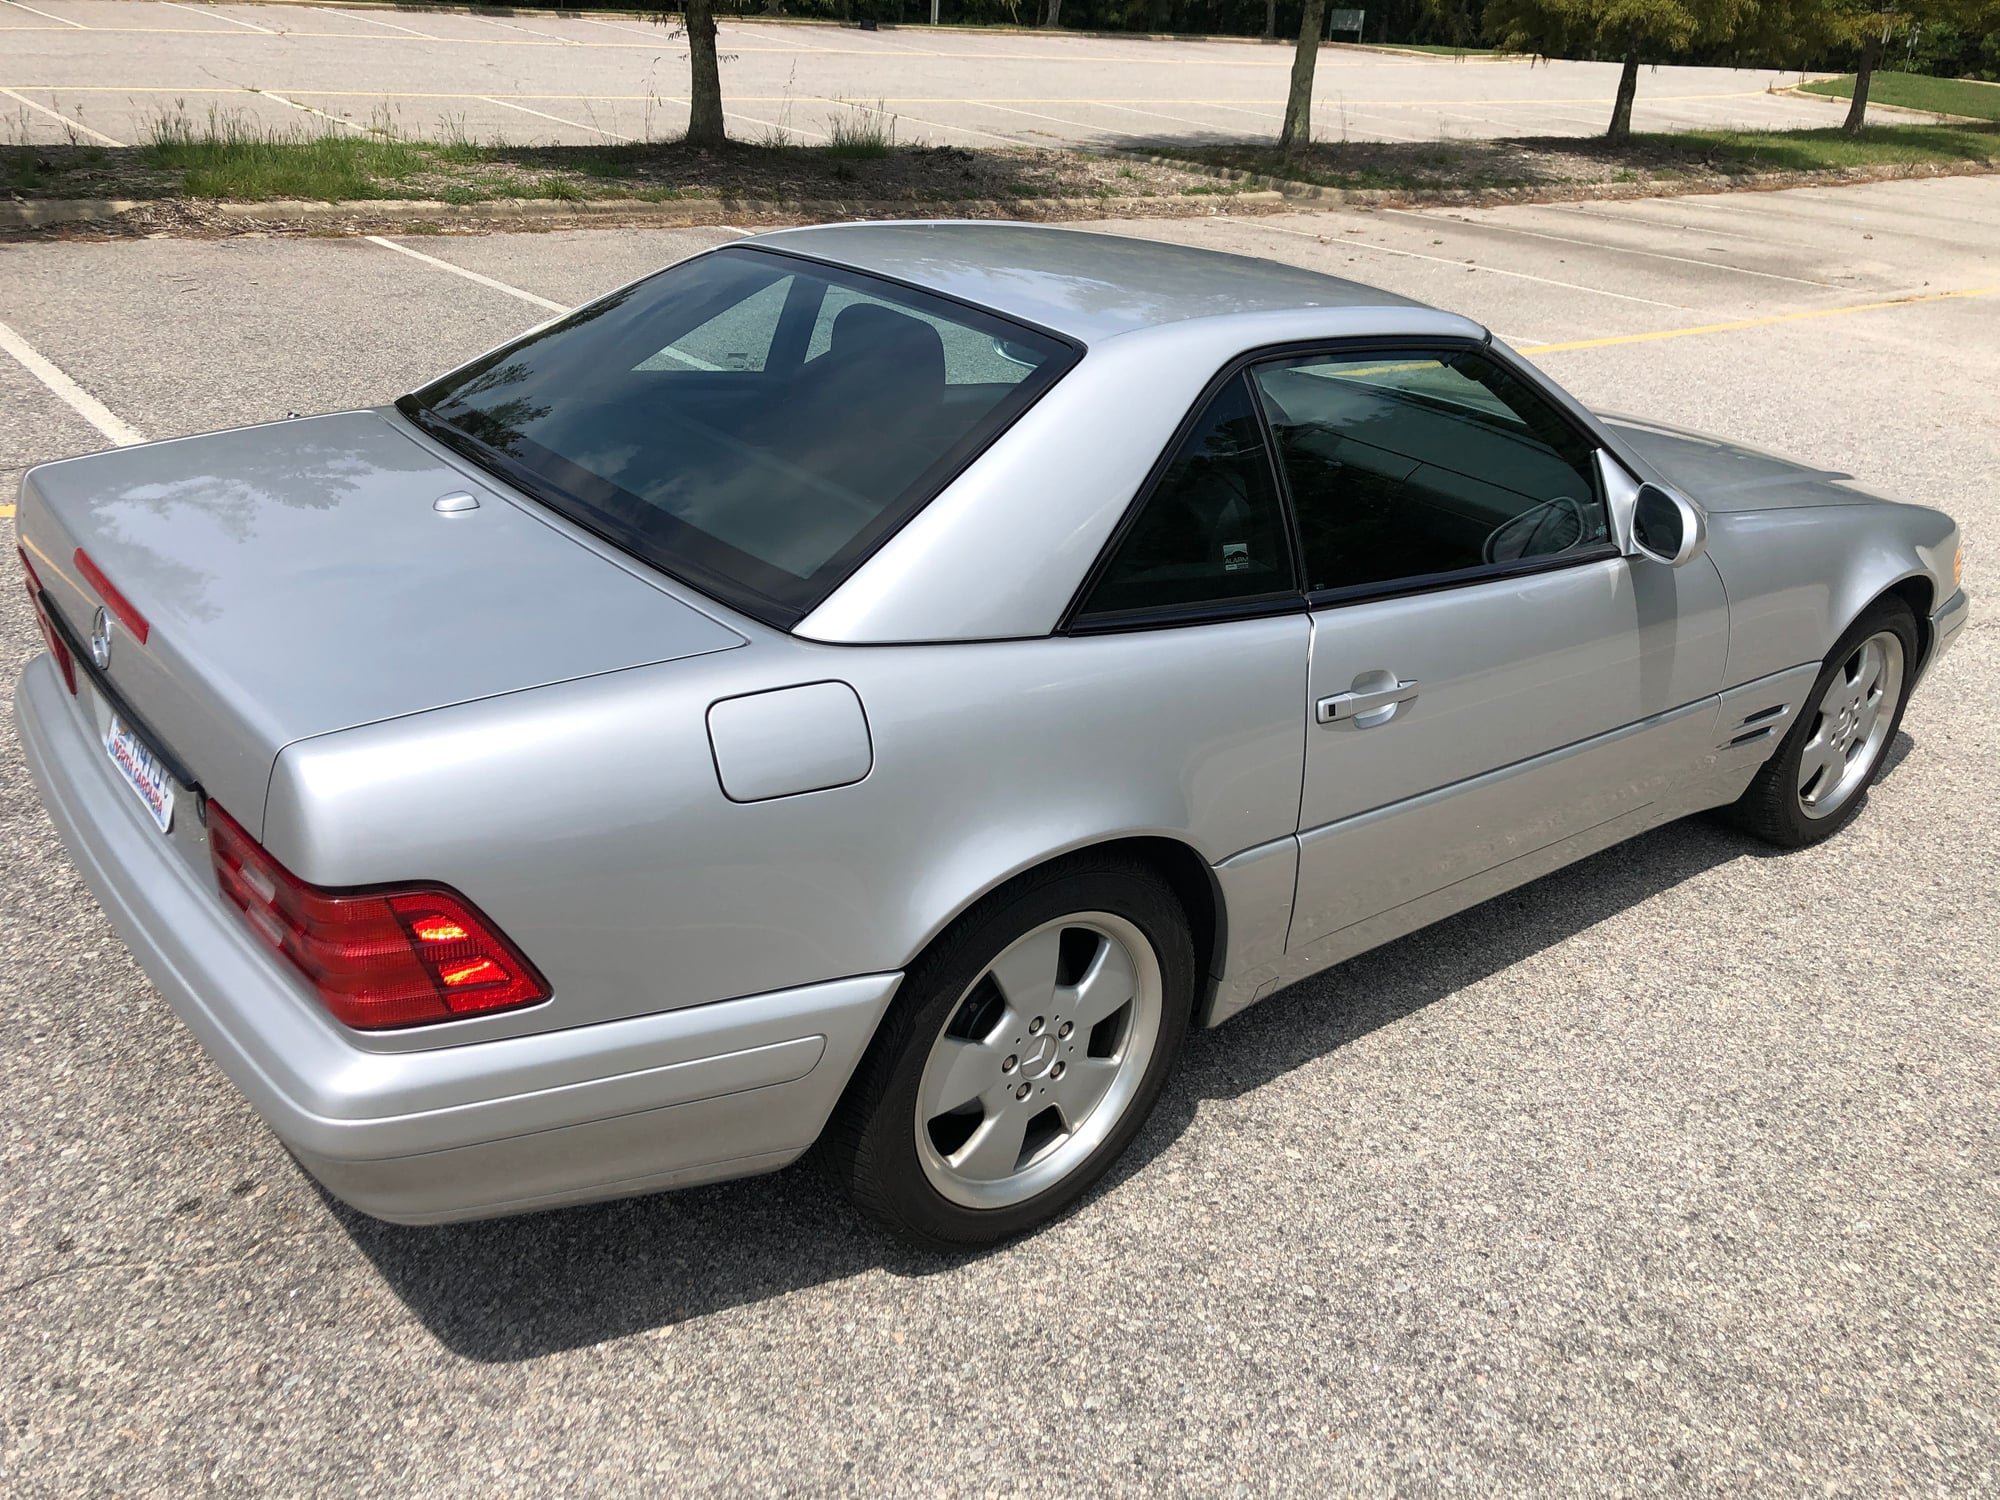 2000 Mercedes-Benz SL500 - 2000 SL500 46k miles 14,500 - Used - VIN WDBFA68FXYF195244 - 46,000 Miles - 8 cyl - 2WD - Automatic - Convertible - Silver - Carrboro, NC 27510, United States